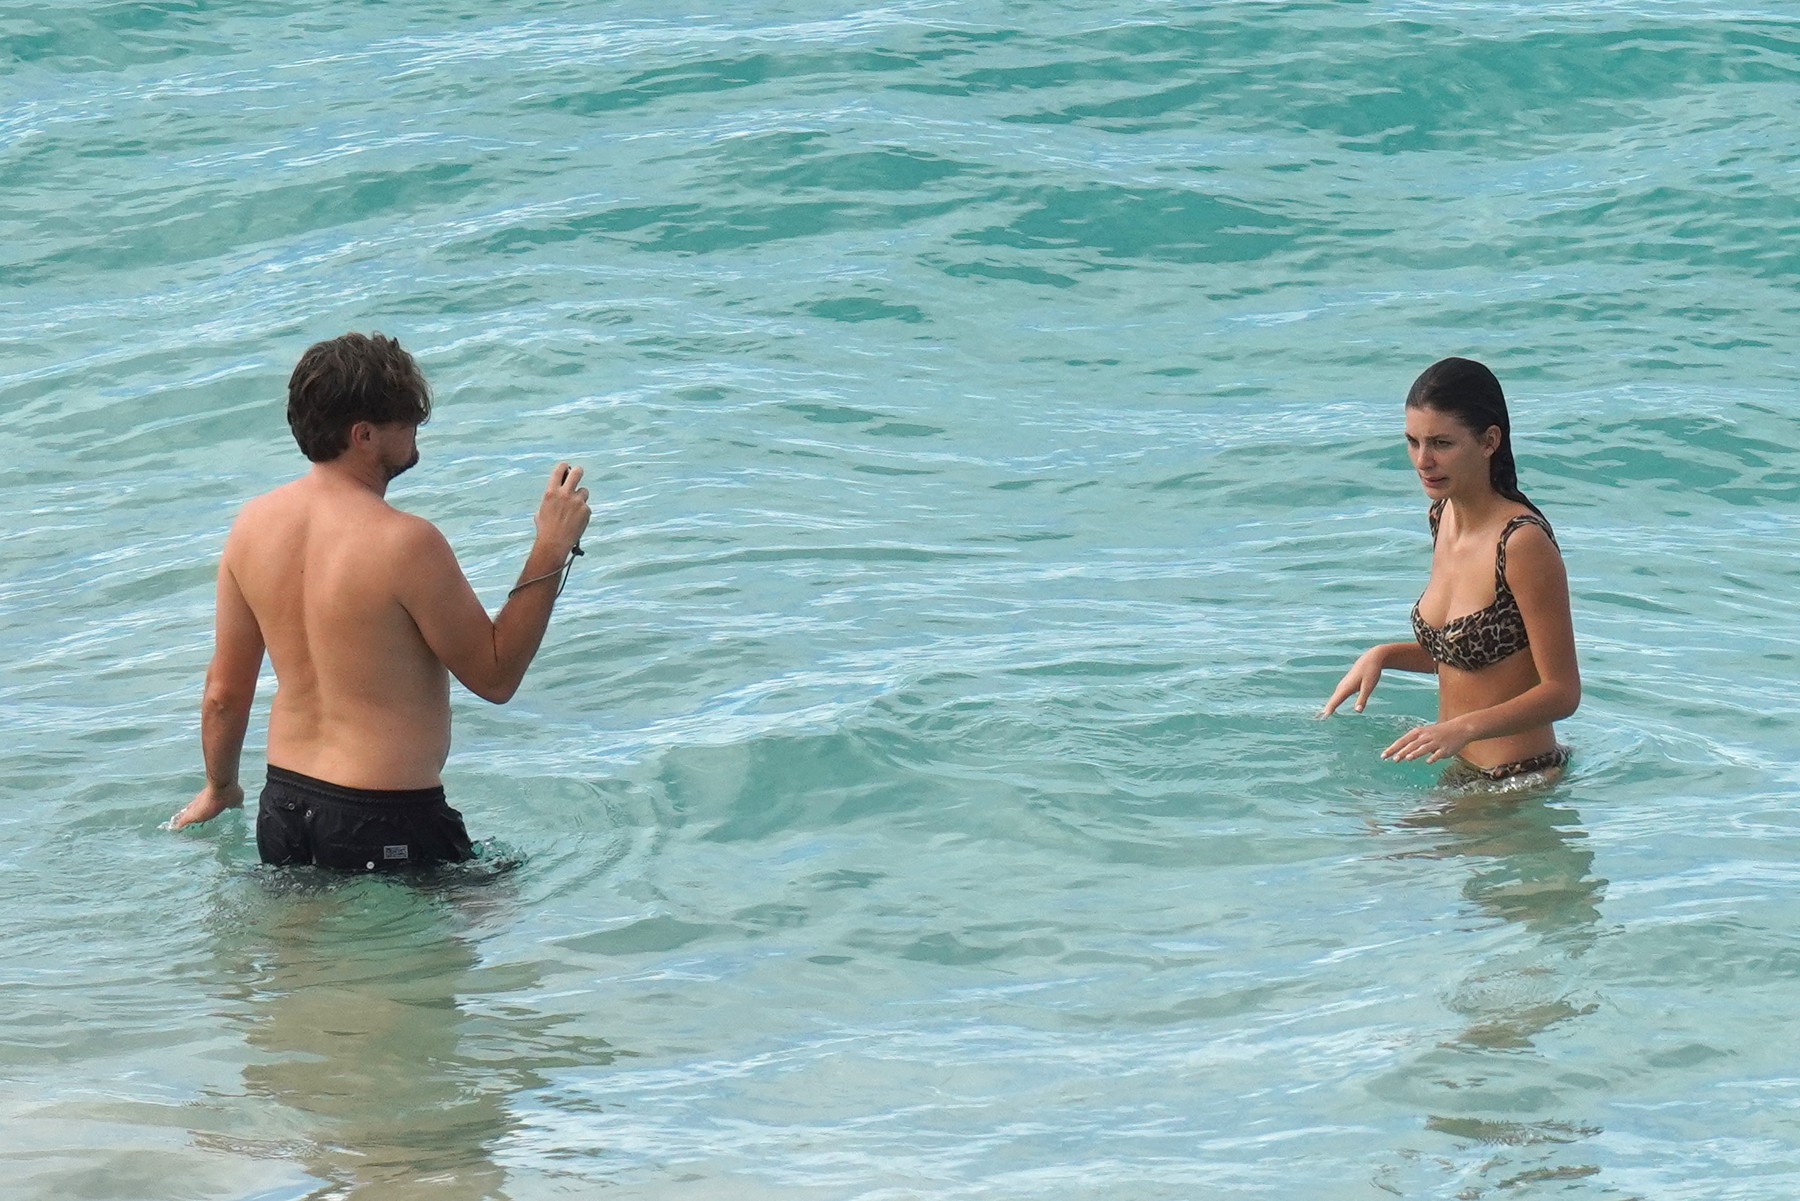 EXCLUSIVE PICTURES. IN POOL WITH ELIOT PRESS AND BACKGRID PHOTOGRAPHER. PLEASE CONTACT LOCAL AGENTS TO KEEP EXCLUSIVE.

THIS SET IS POOL.

Leonardo DiCaprio and Camila Morrone enjoy their holiday with a day at the beach on December 31st 2019 in St Barts., Image: 490785875, License: Rights-managed, Restrictions: , Model Release: no, Credit line: IMP Features / IMP Features / Profimedia